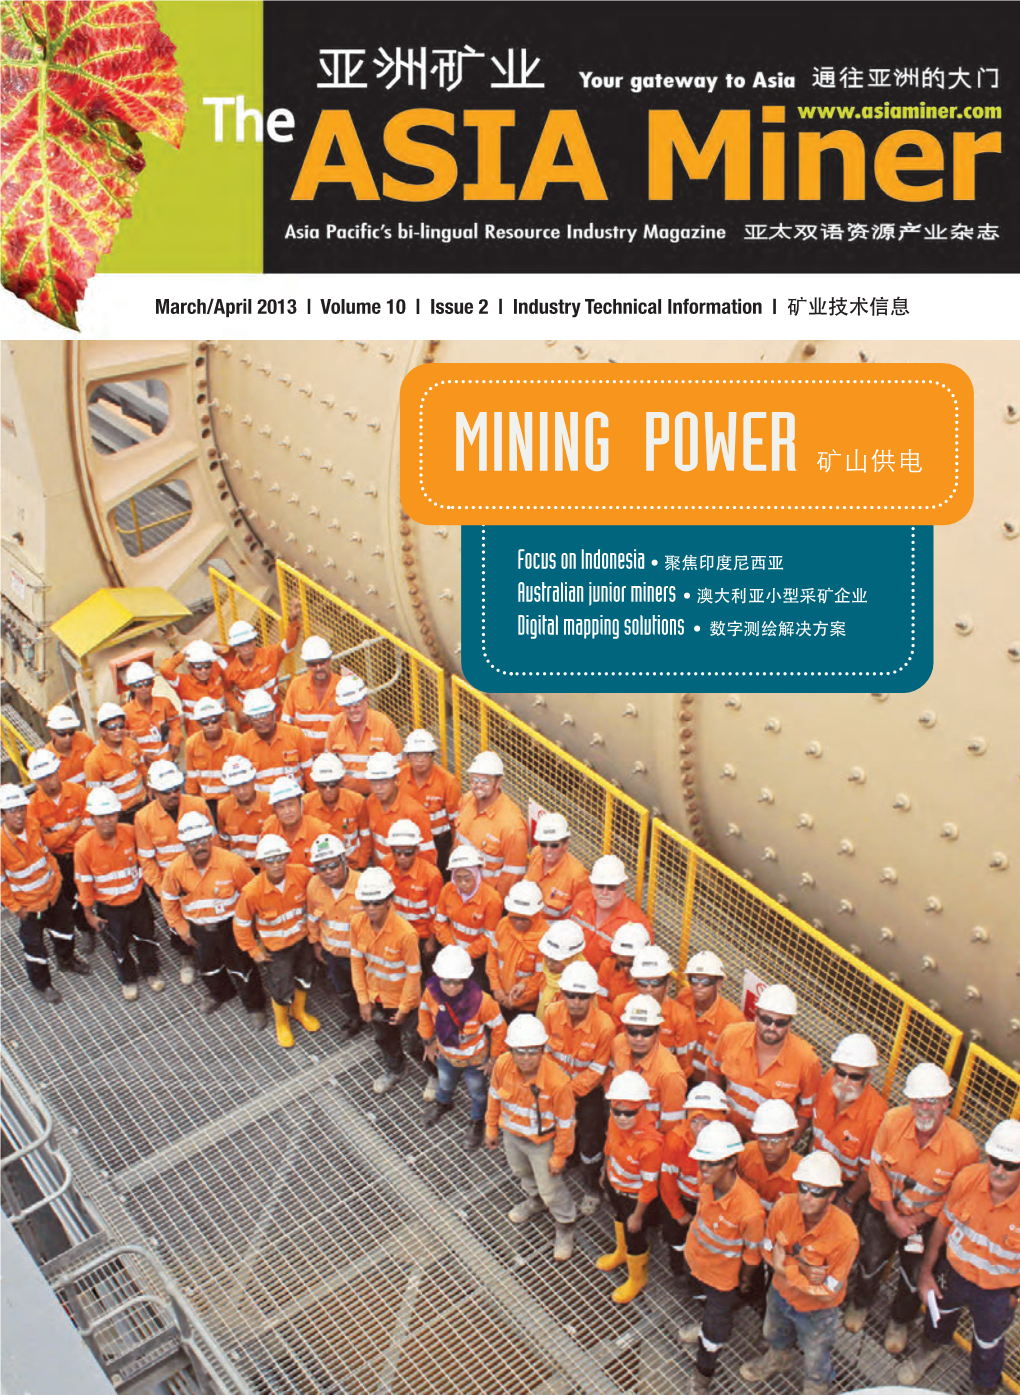 March/April 2013 | Volume 10 | Issue 2 | Industry Technical Information | 矿业技术信息